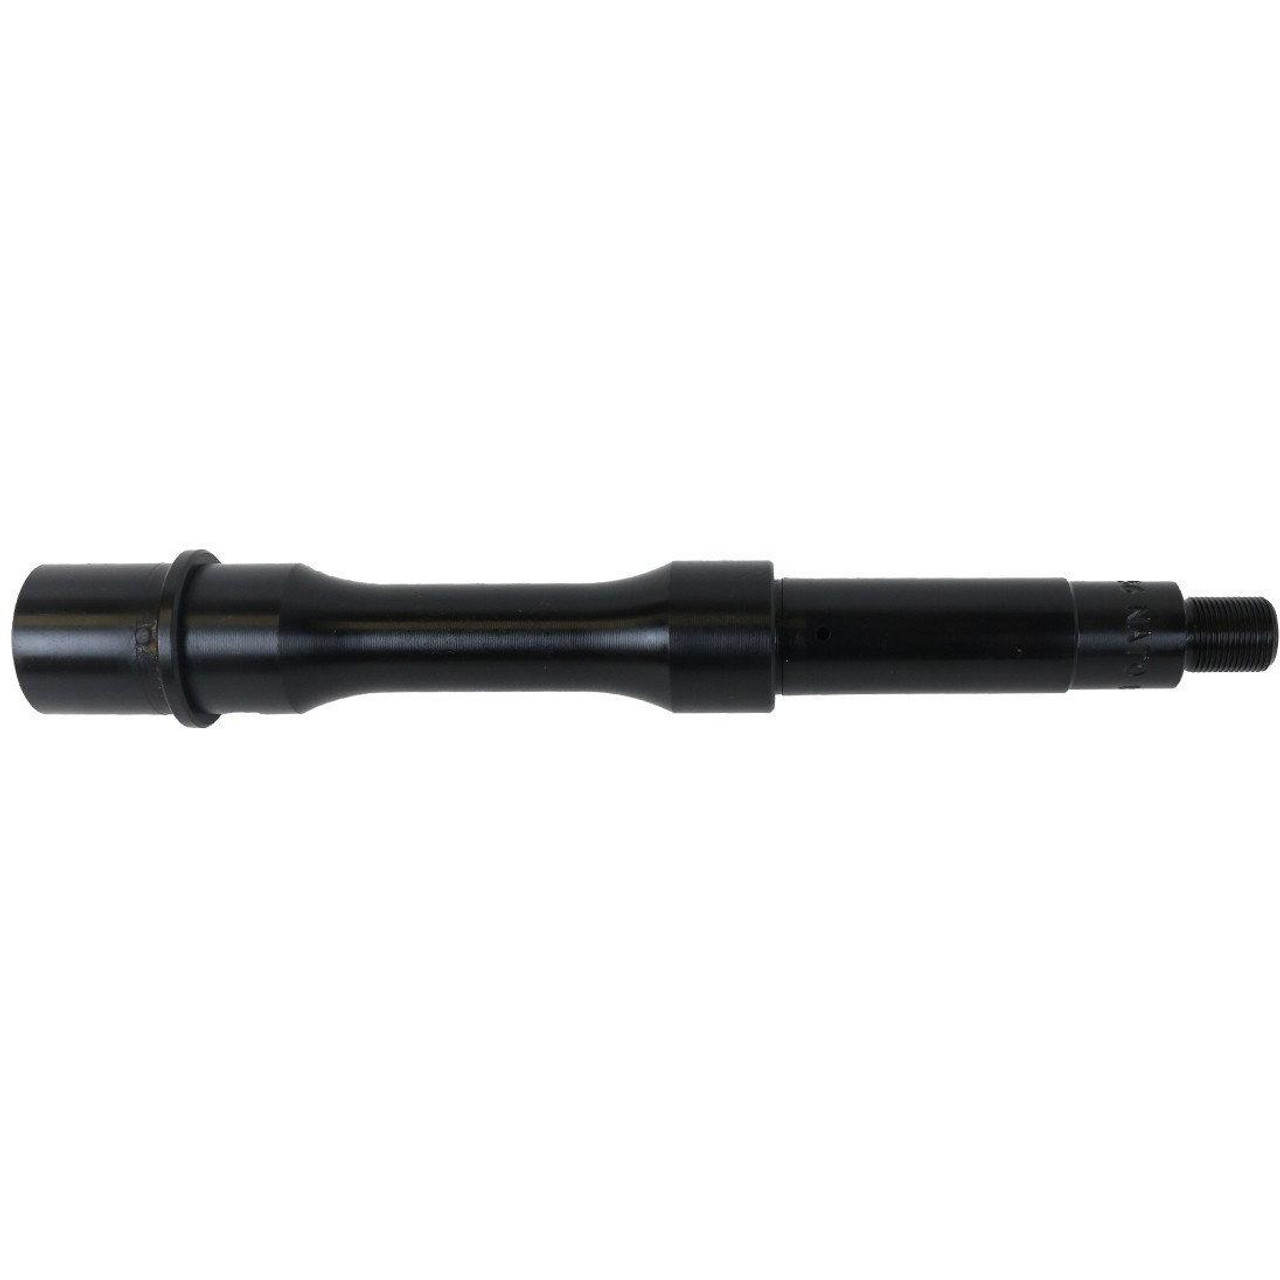 MDX Arms 7.5" .223 Wylde Stainless Steel 416R Black Nitride Finish Contour Barrel with 1:7 Twist